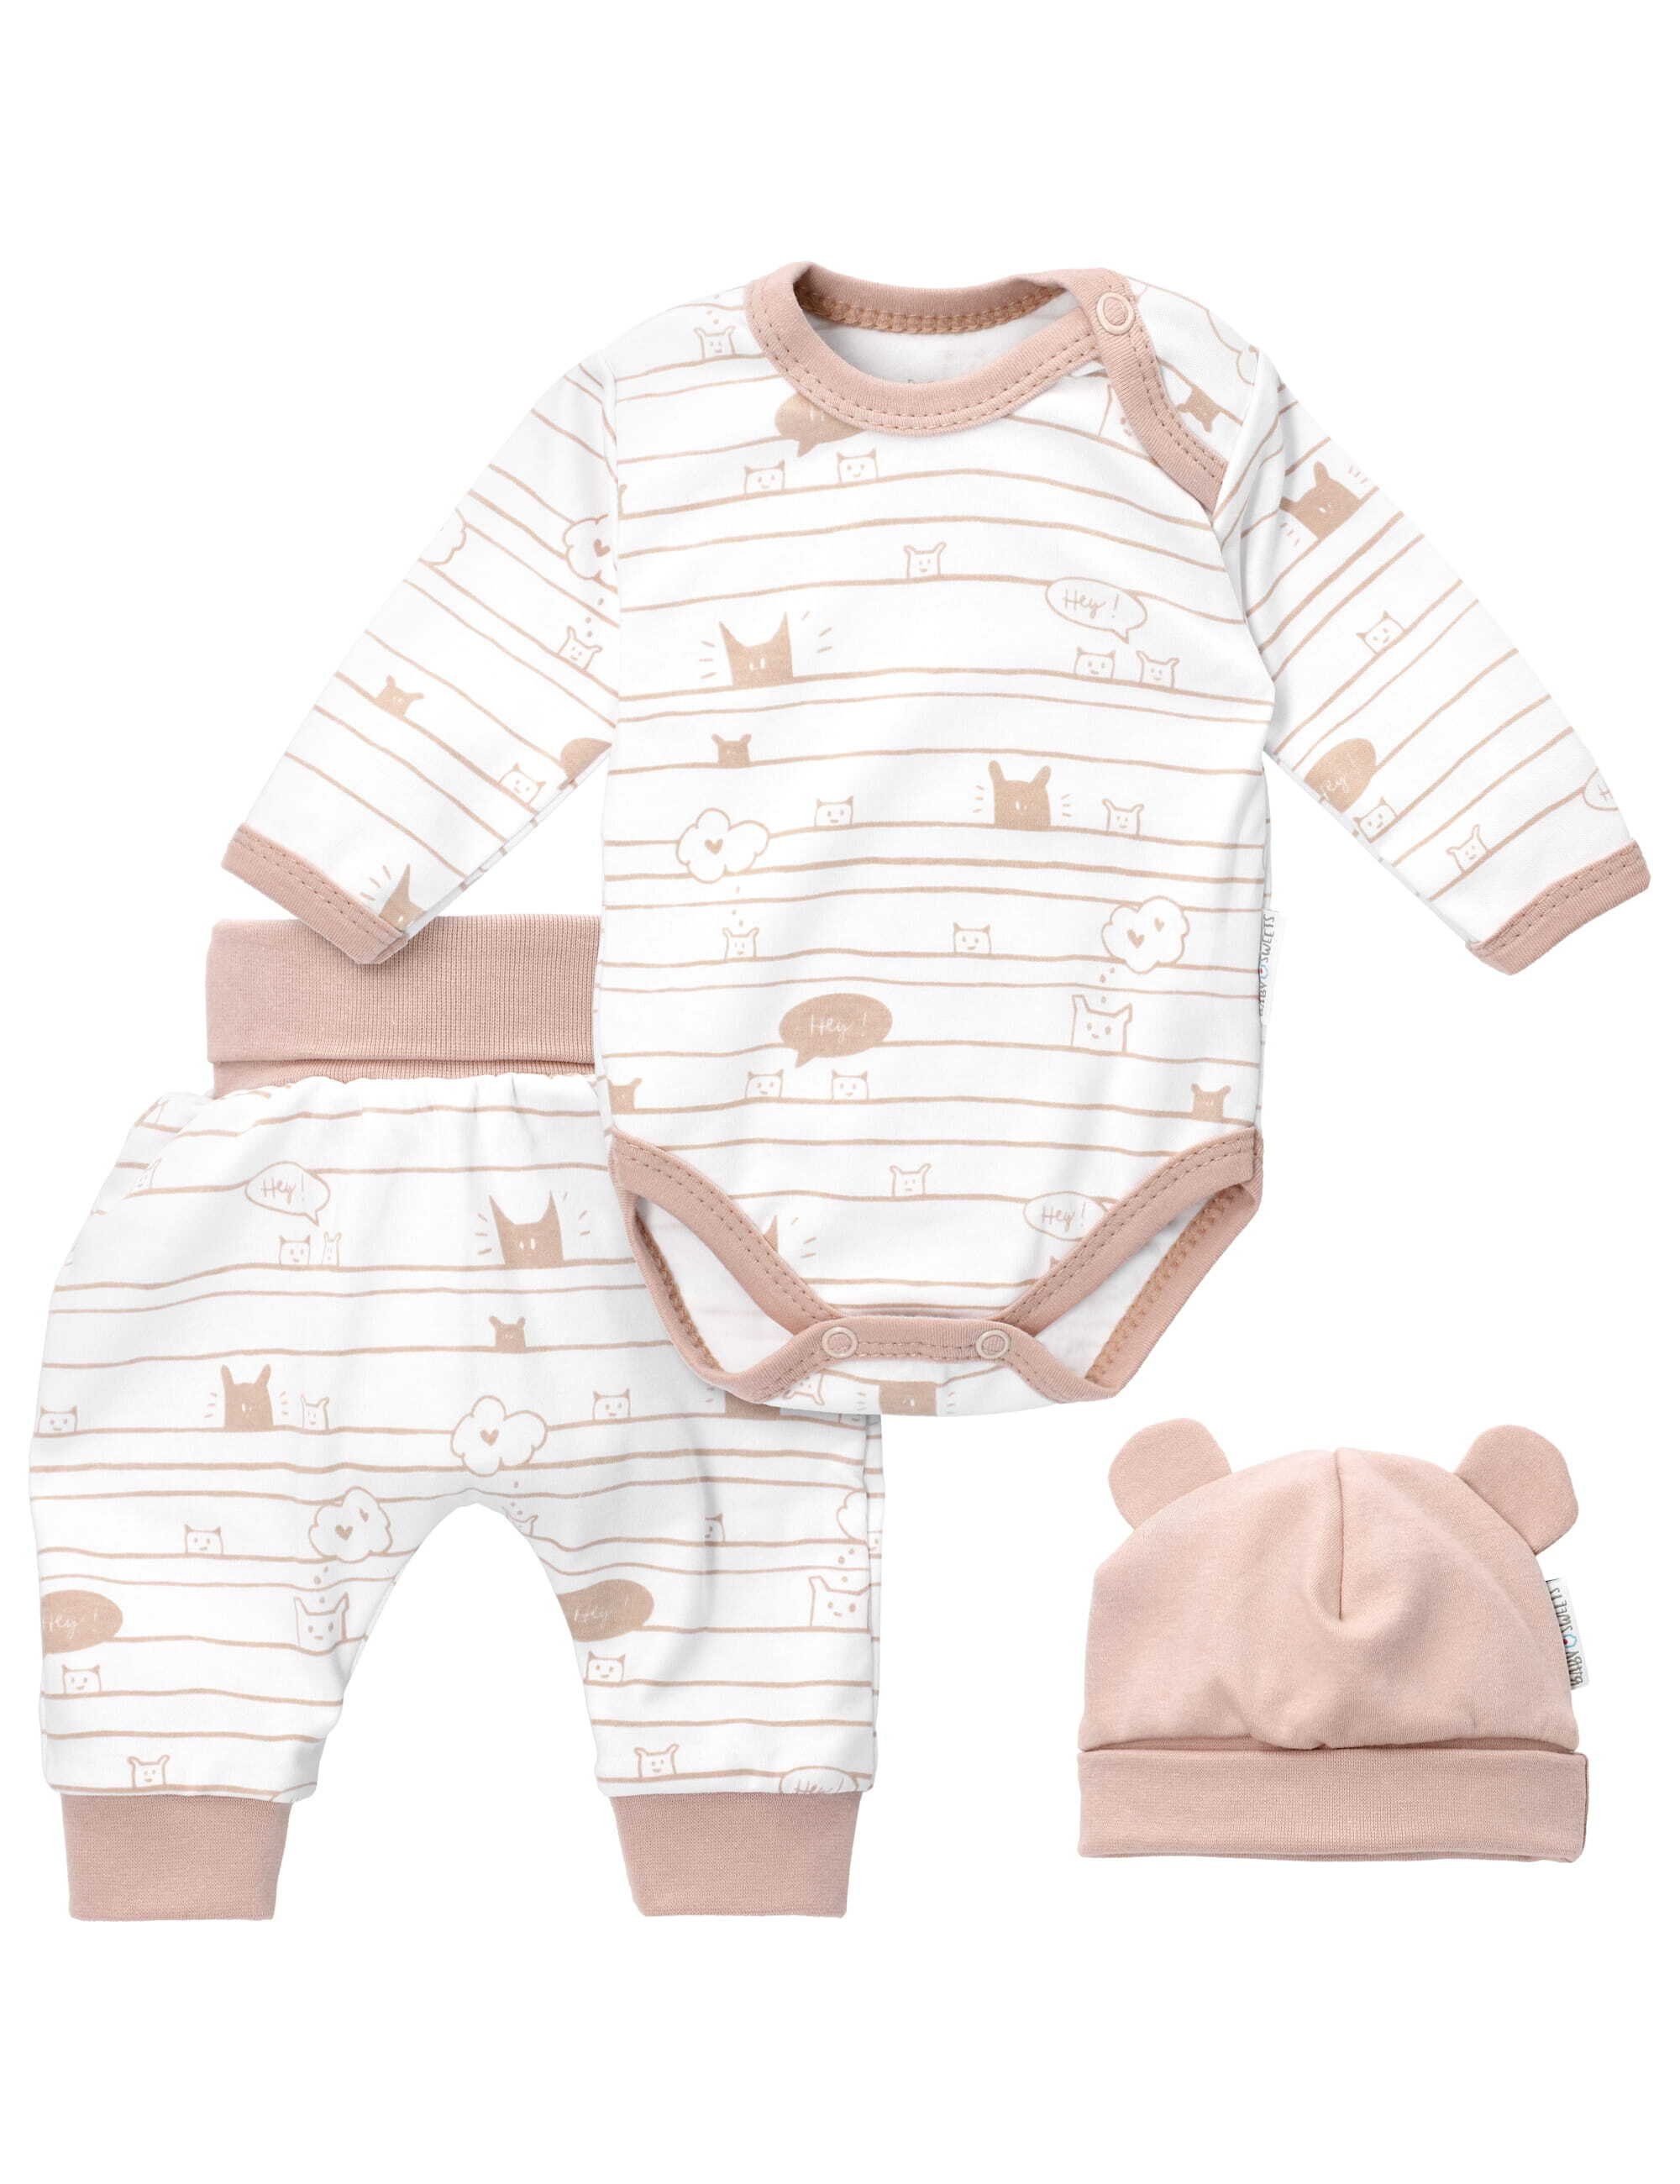 Baby Sweets Body & Hose Set Tiere (3-tlg., 3 Teile) beige creme